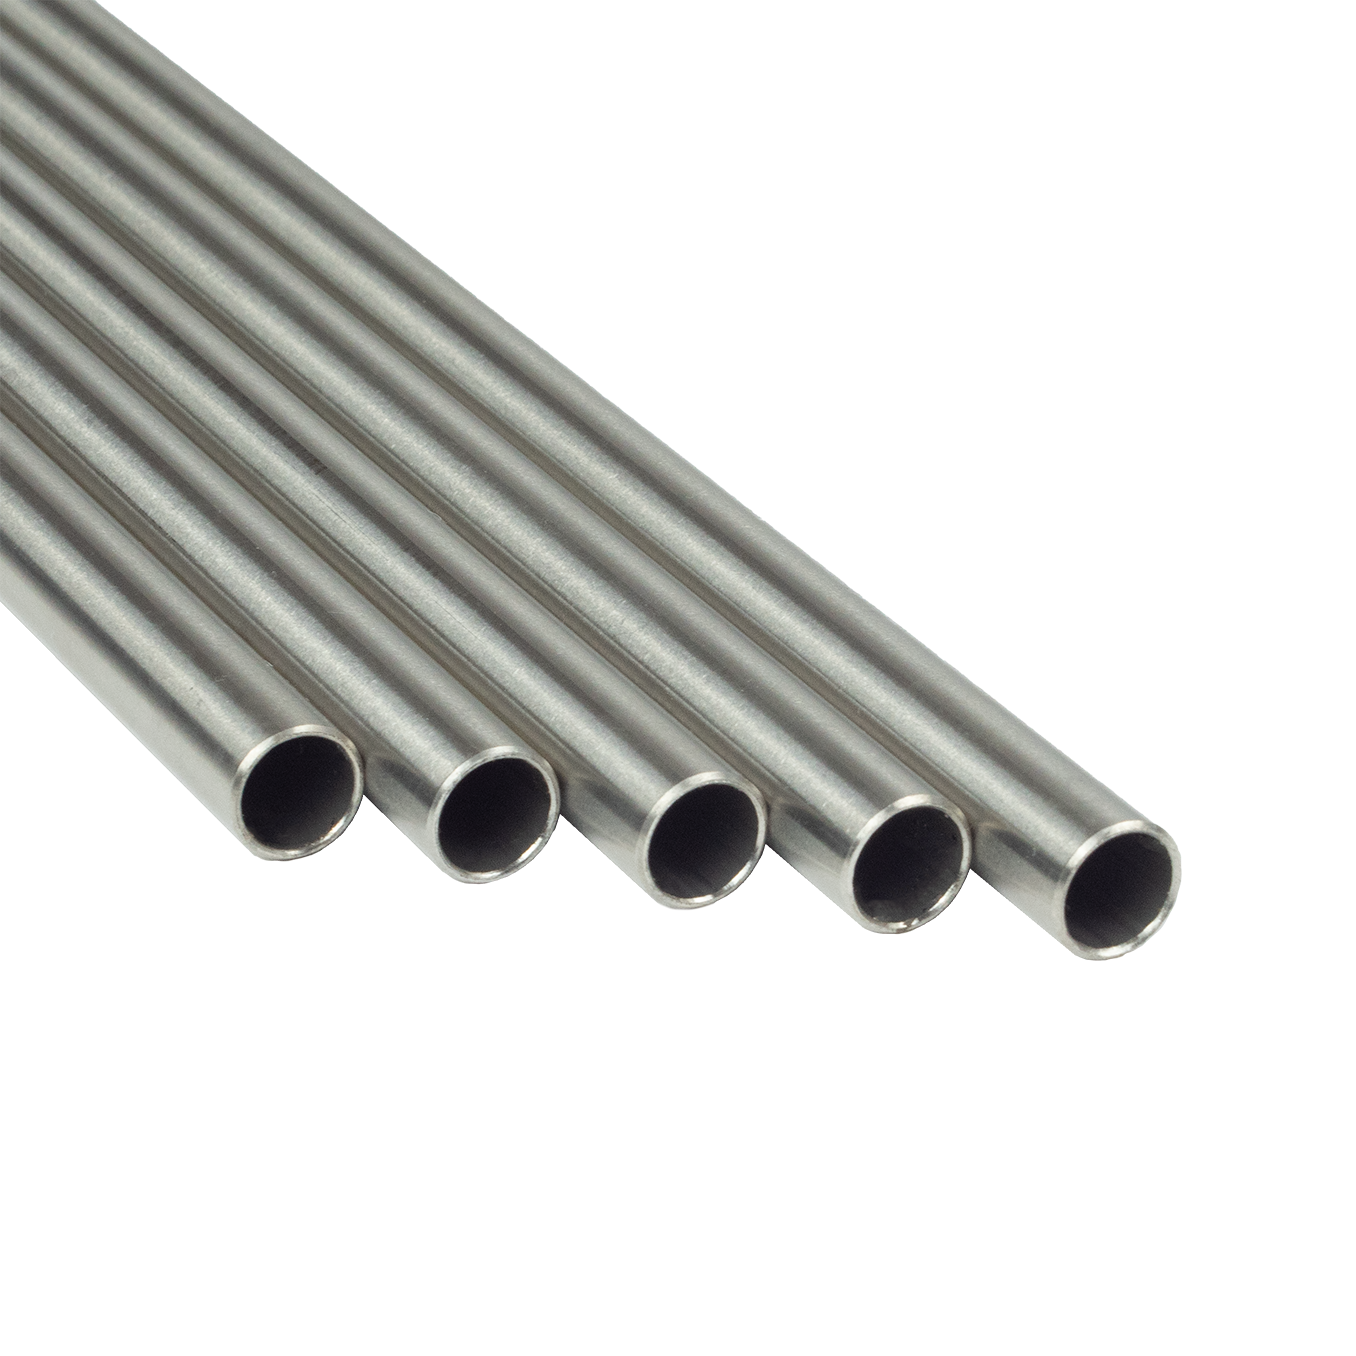 SFS Stand Tube - Ø 10 x 1 mm, length 630 mm - stainless steel